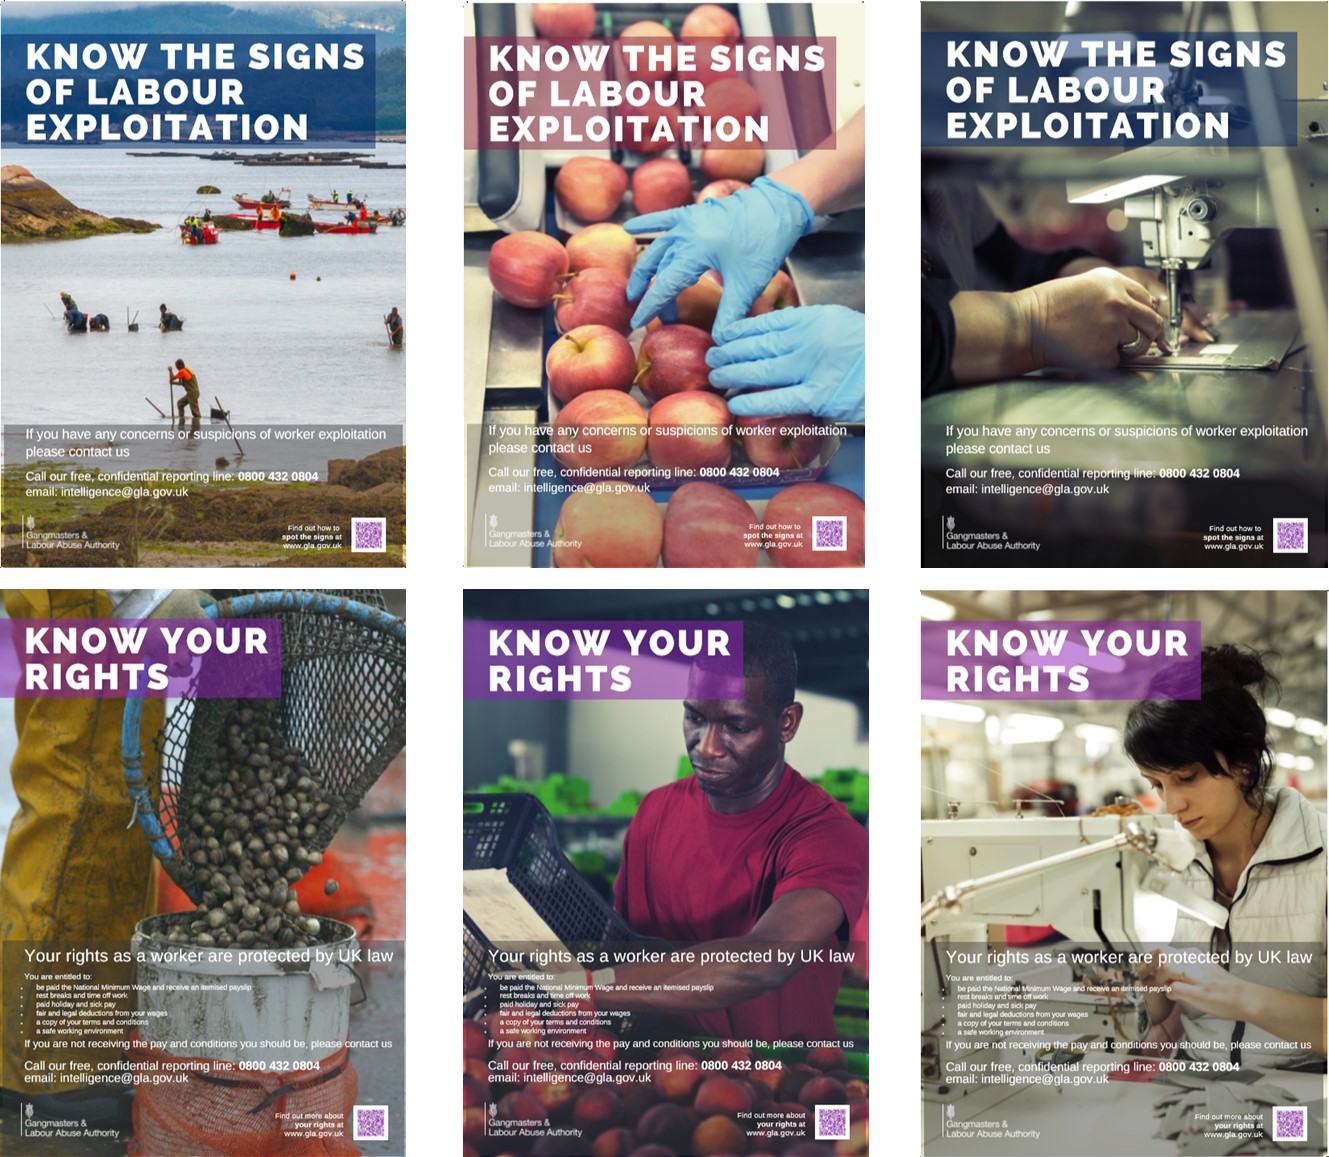 Six Know the signs of labour exploitation know your rights poster images